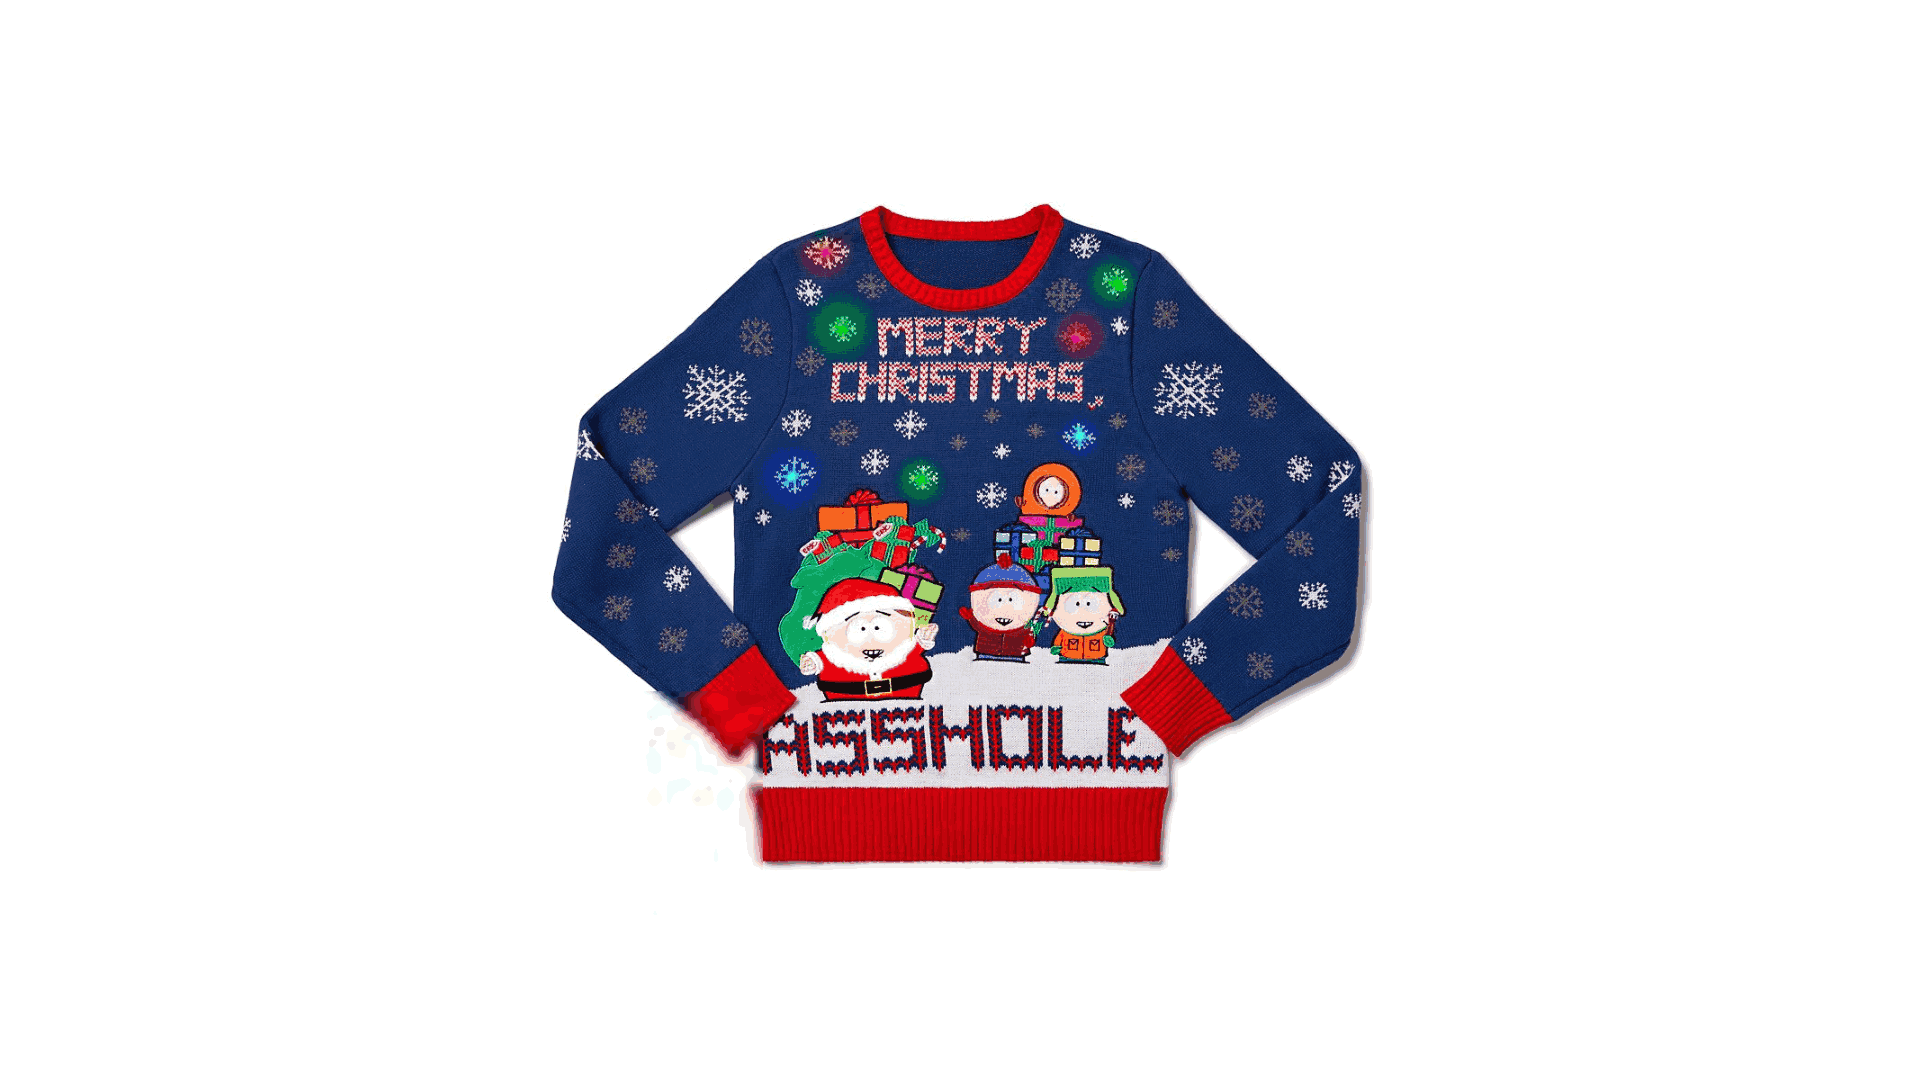 Merry Christmas Asshole Ugly Christmas Sweater South Park